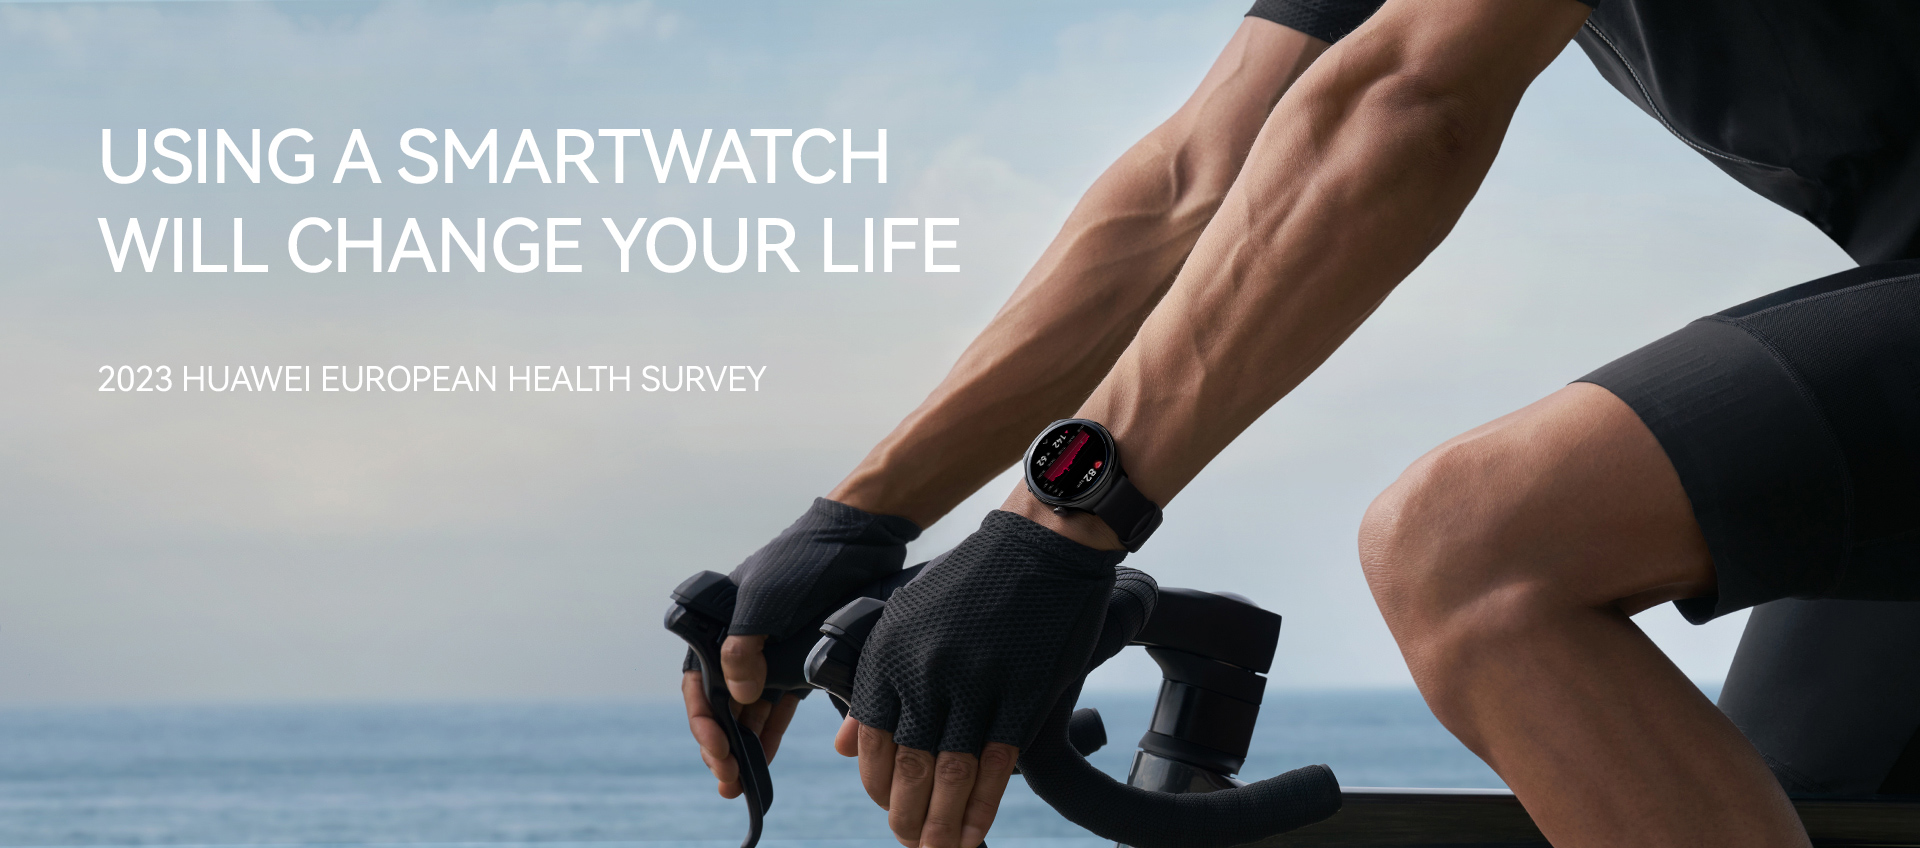 Smartwatches Bring Positive Change to Health. 87% of Smartwatch Users Adopted New Healthy Behaviours